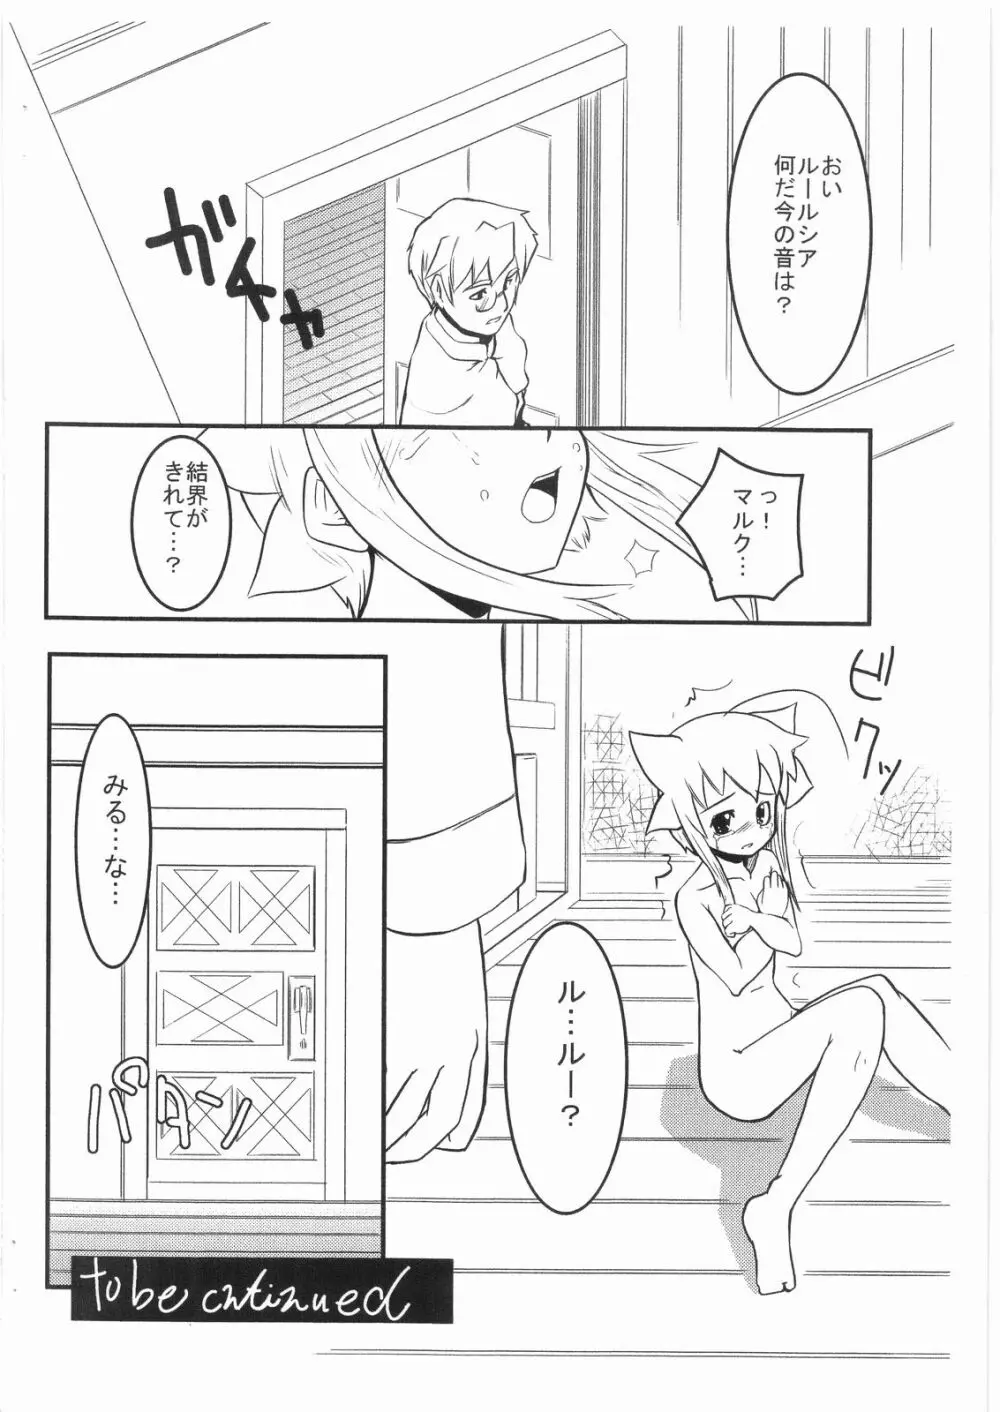 Witch Note another vol.1 ルールシア外伝 ～最悪の日～ Page.21